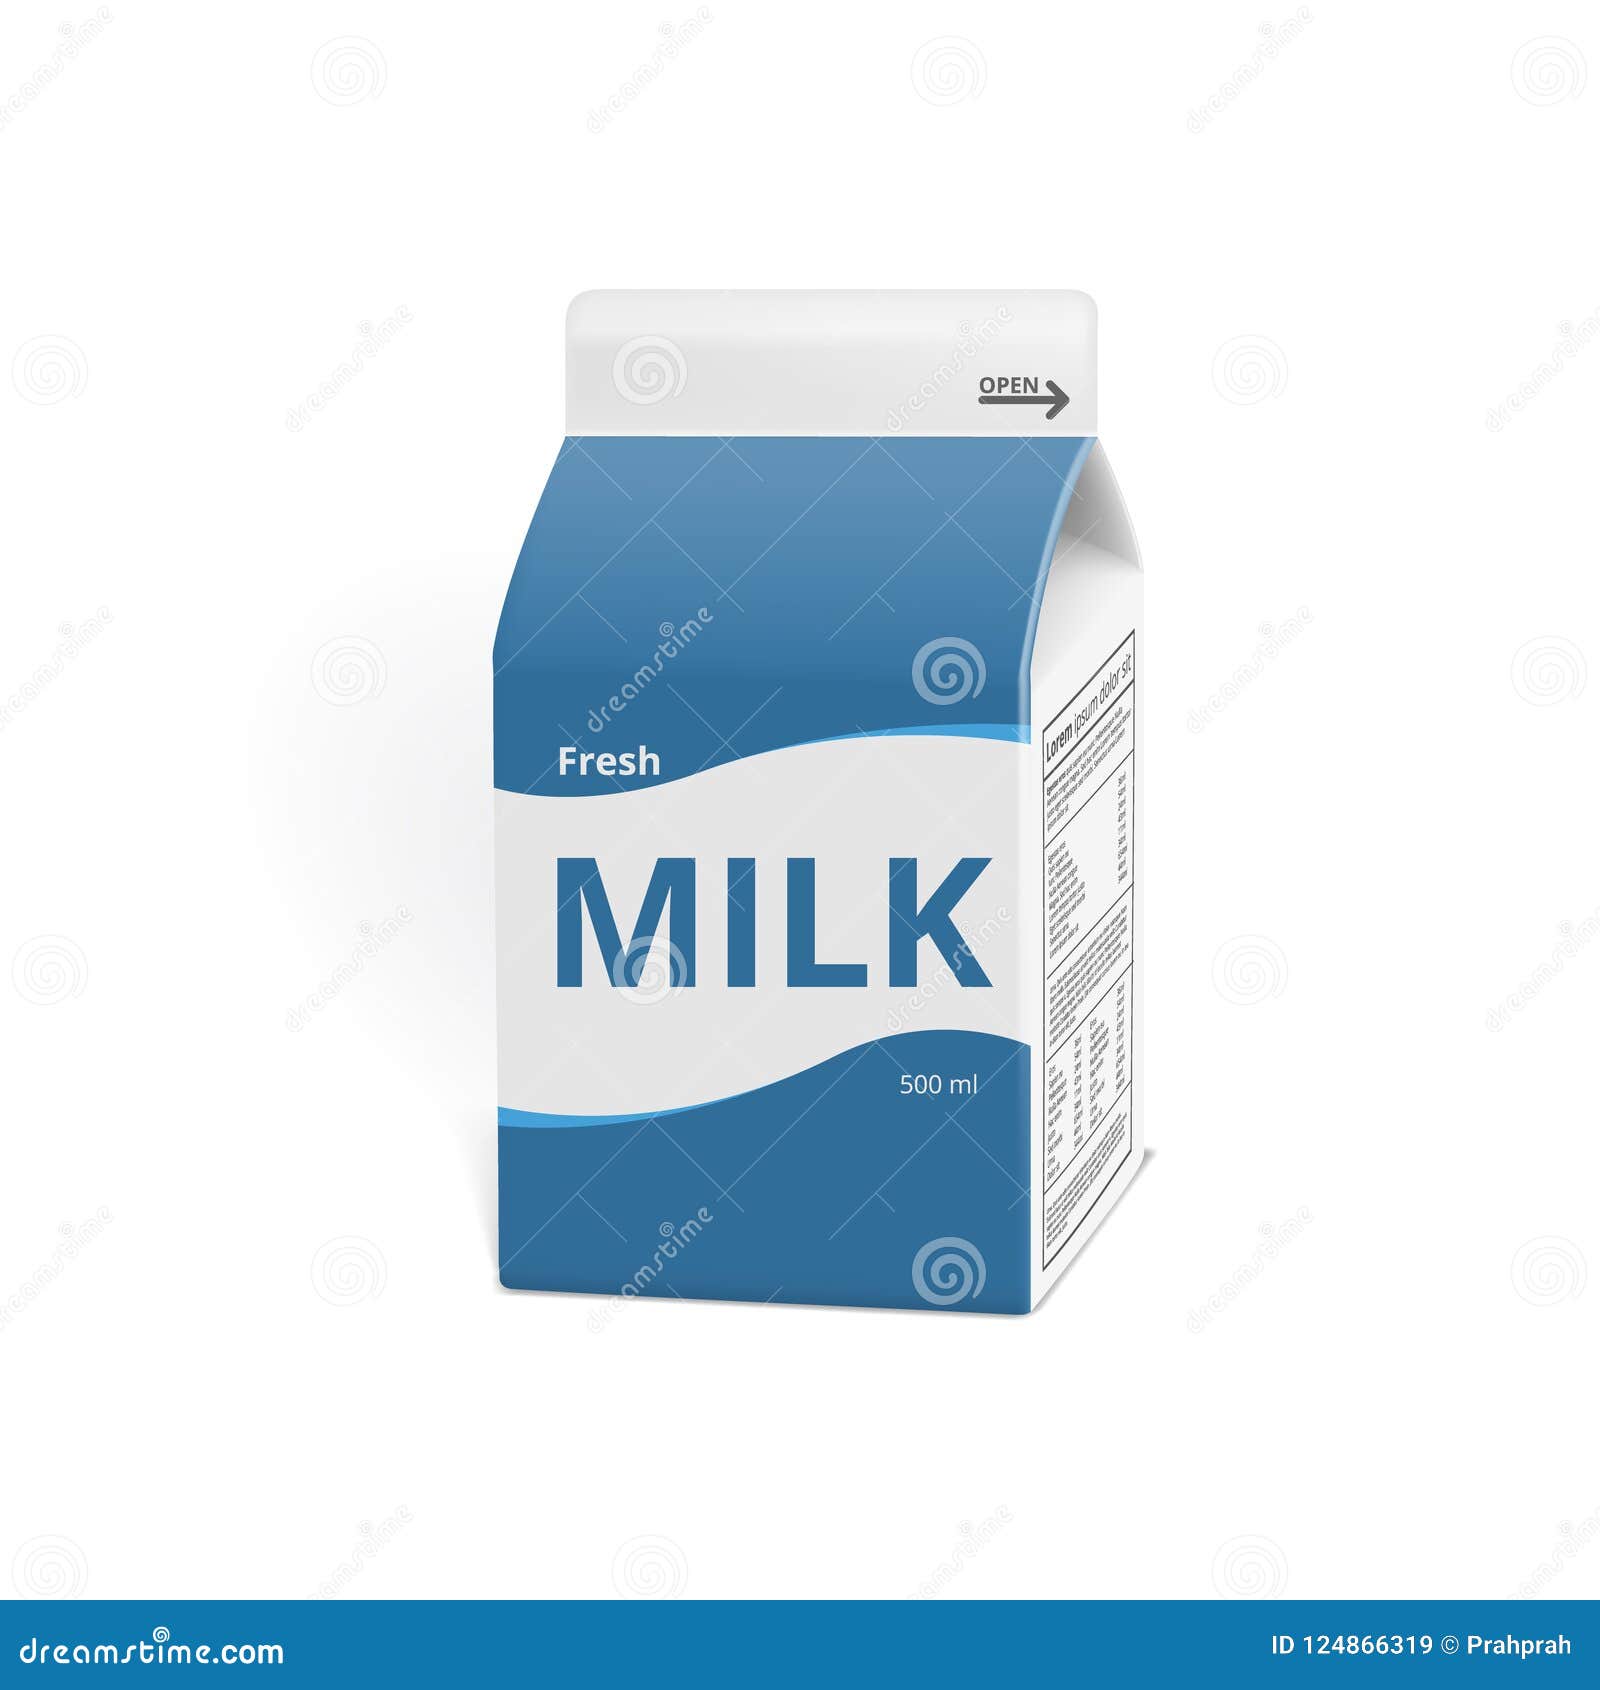 realistic 3d milk carton packing  on white